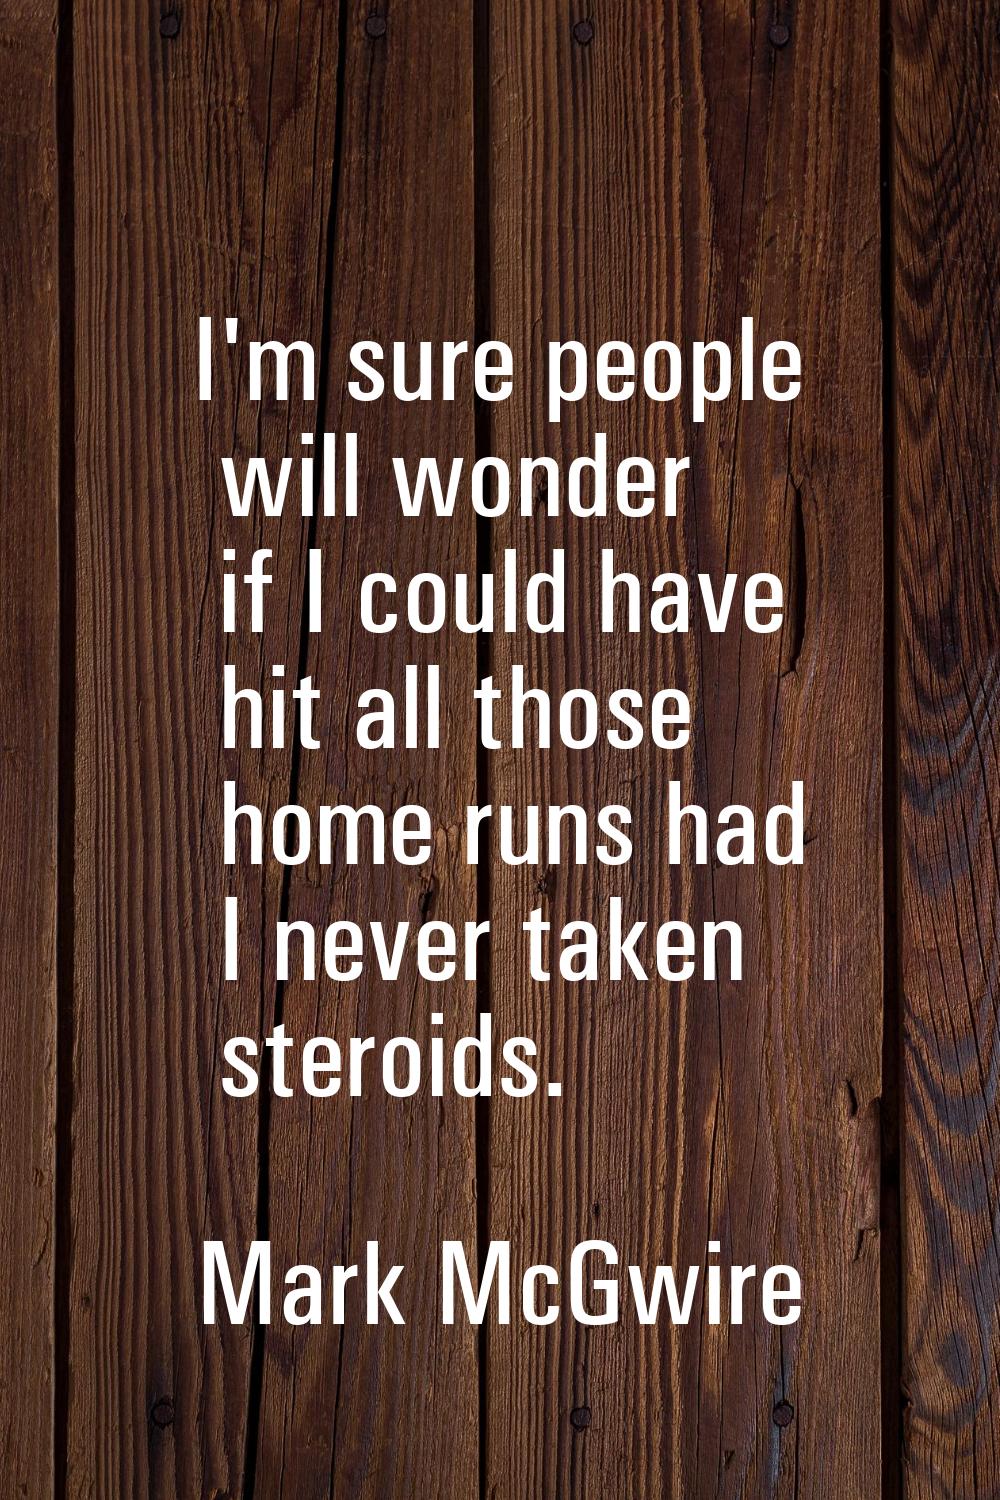 I'm sure people will wonder if I could have hit all those home runs had I never taken steroids.